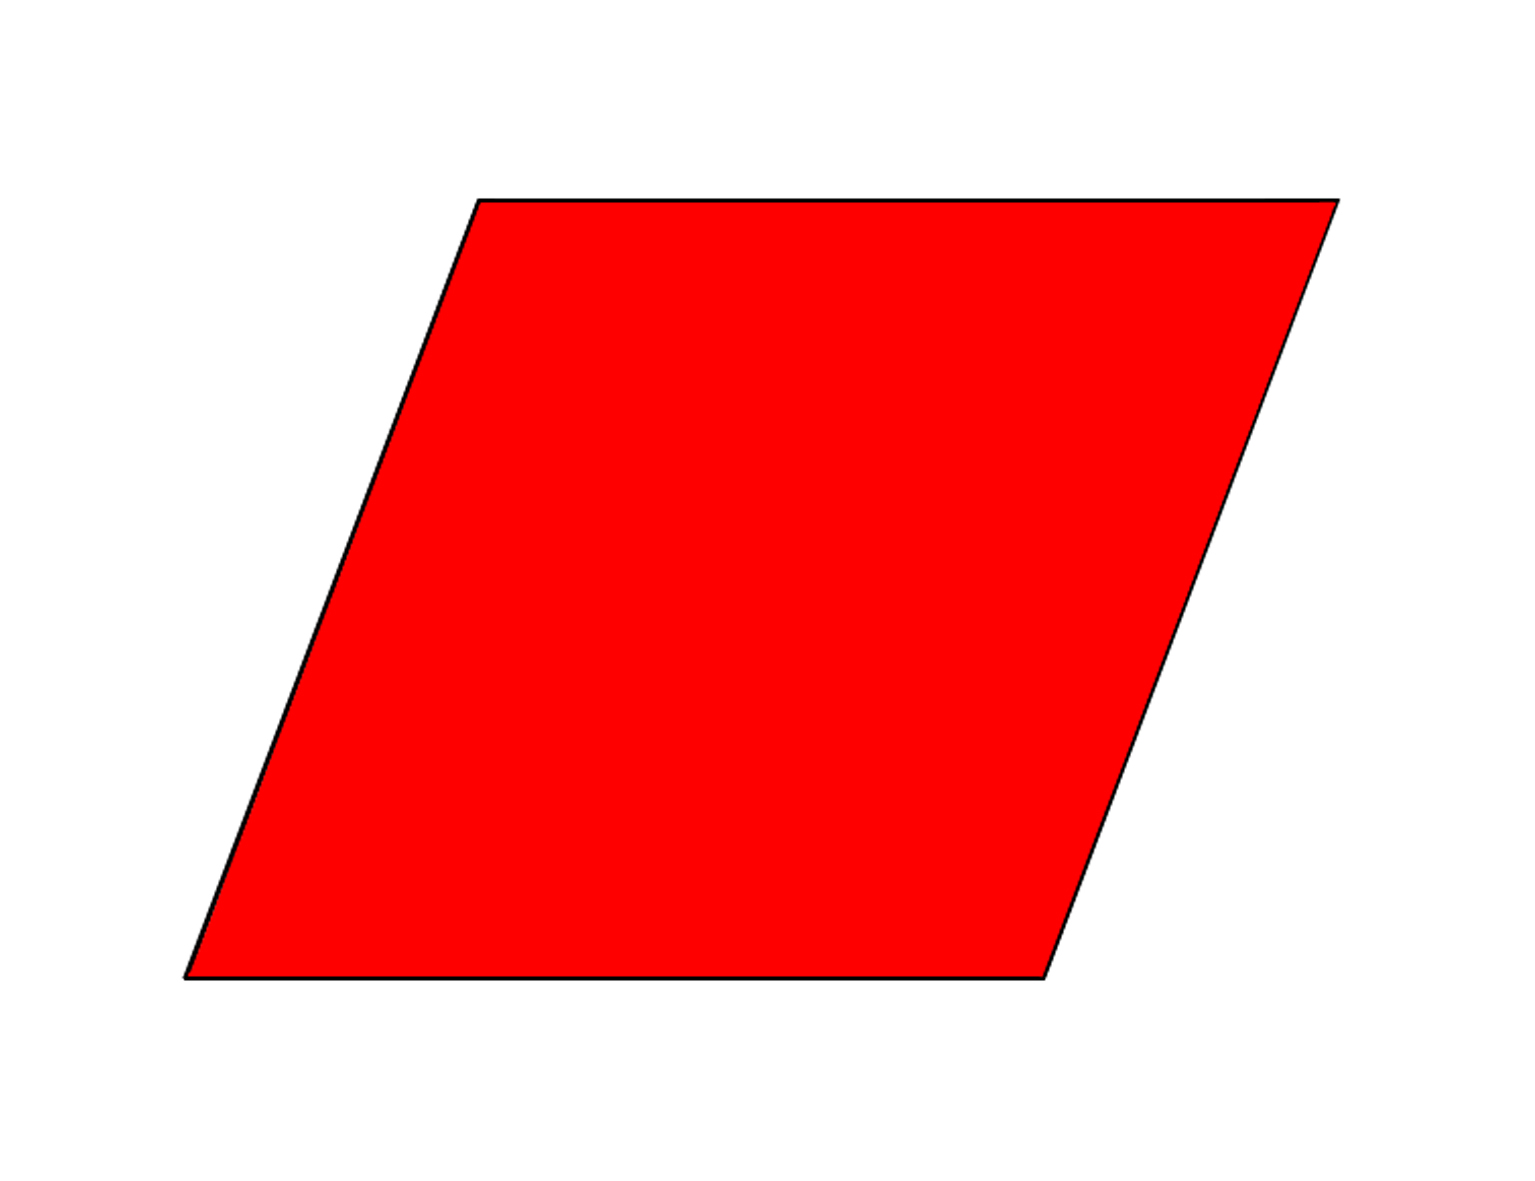 Parallelogram Shape In Real Life